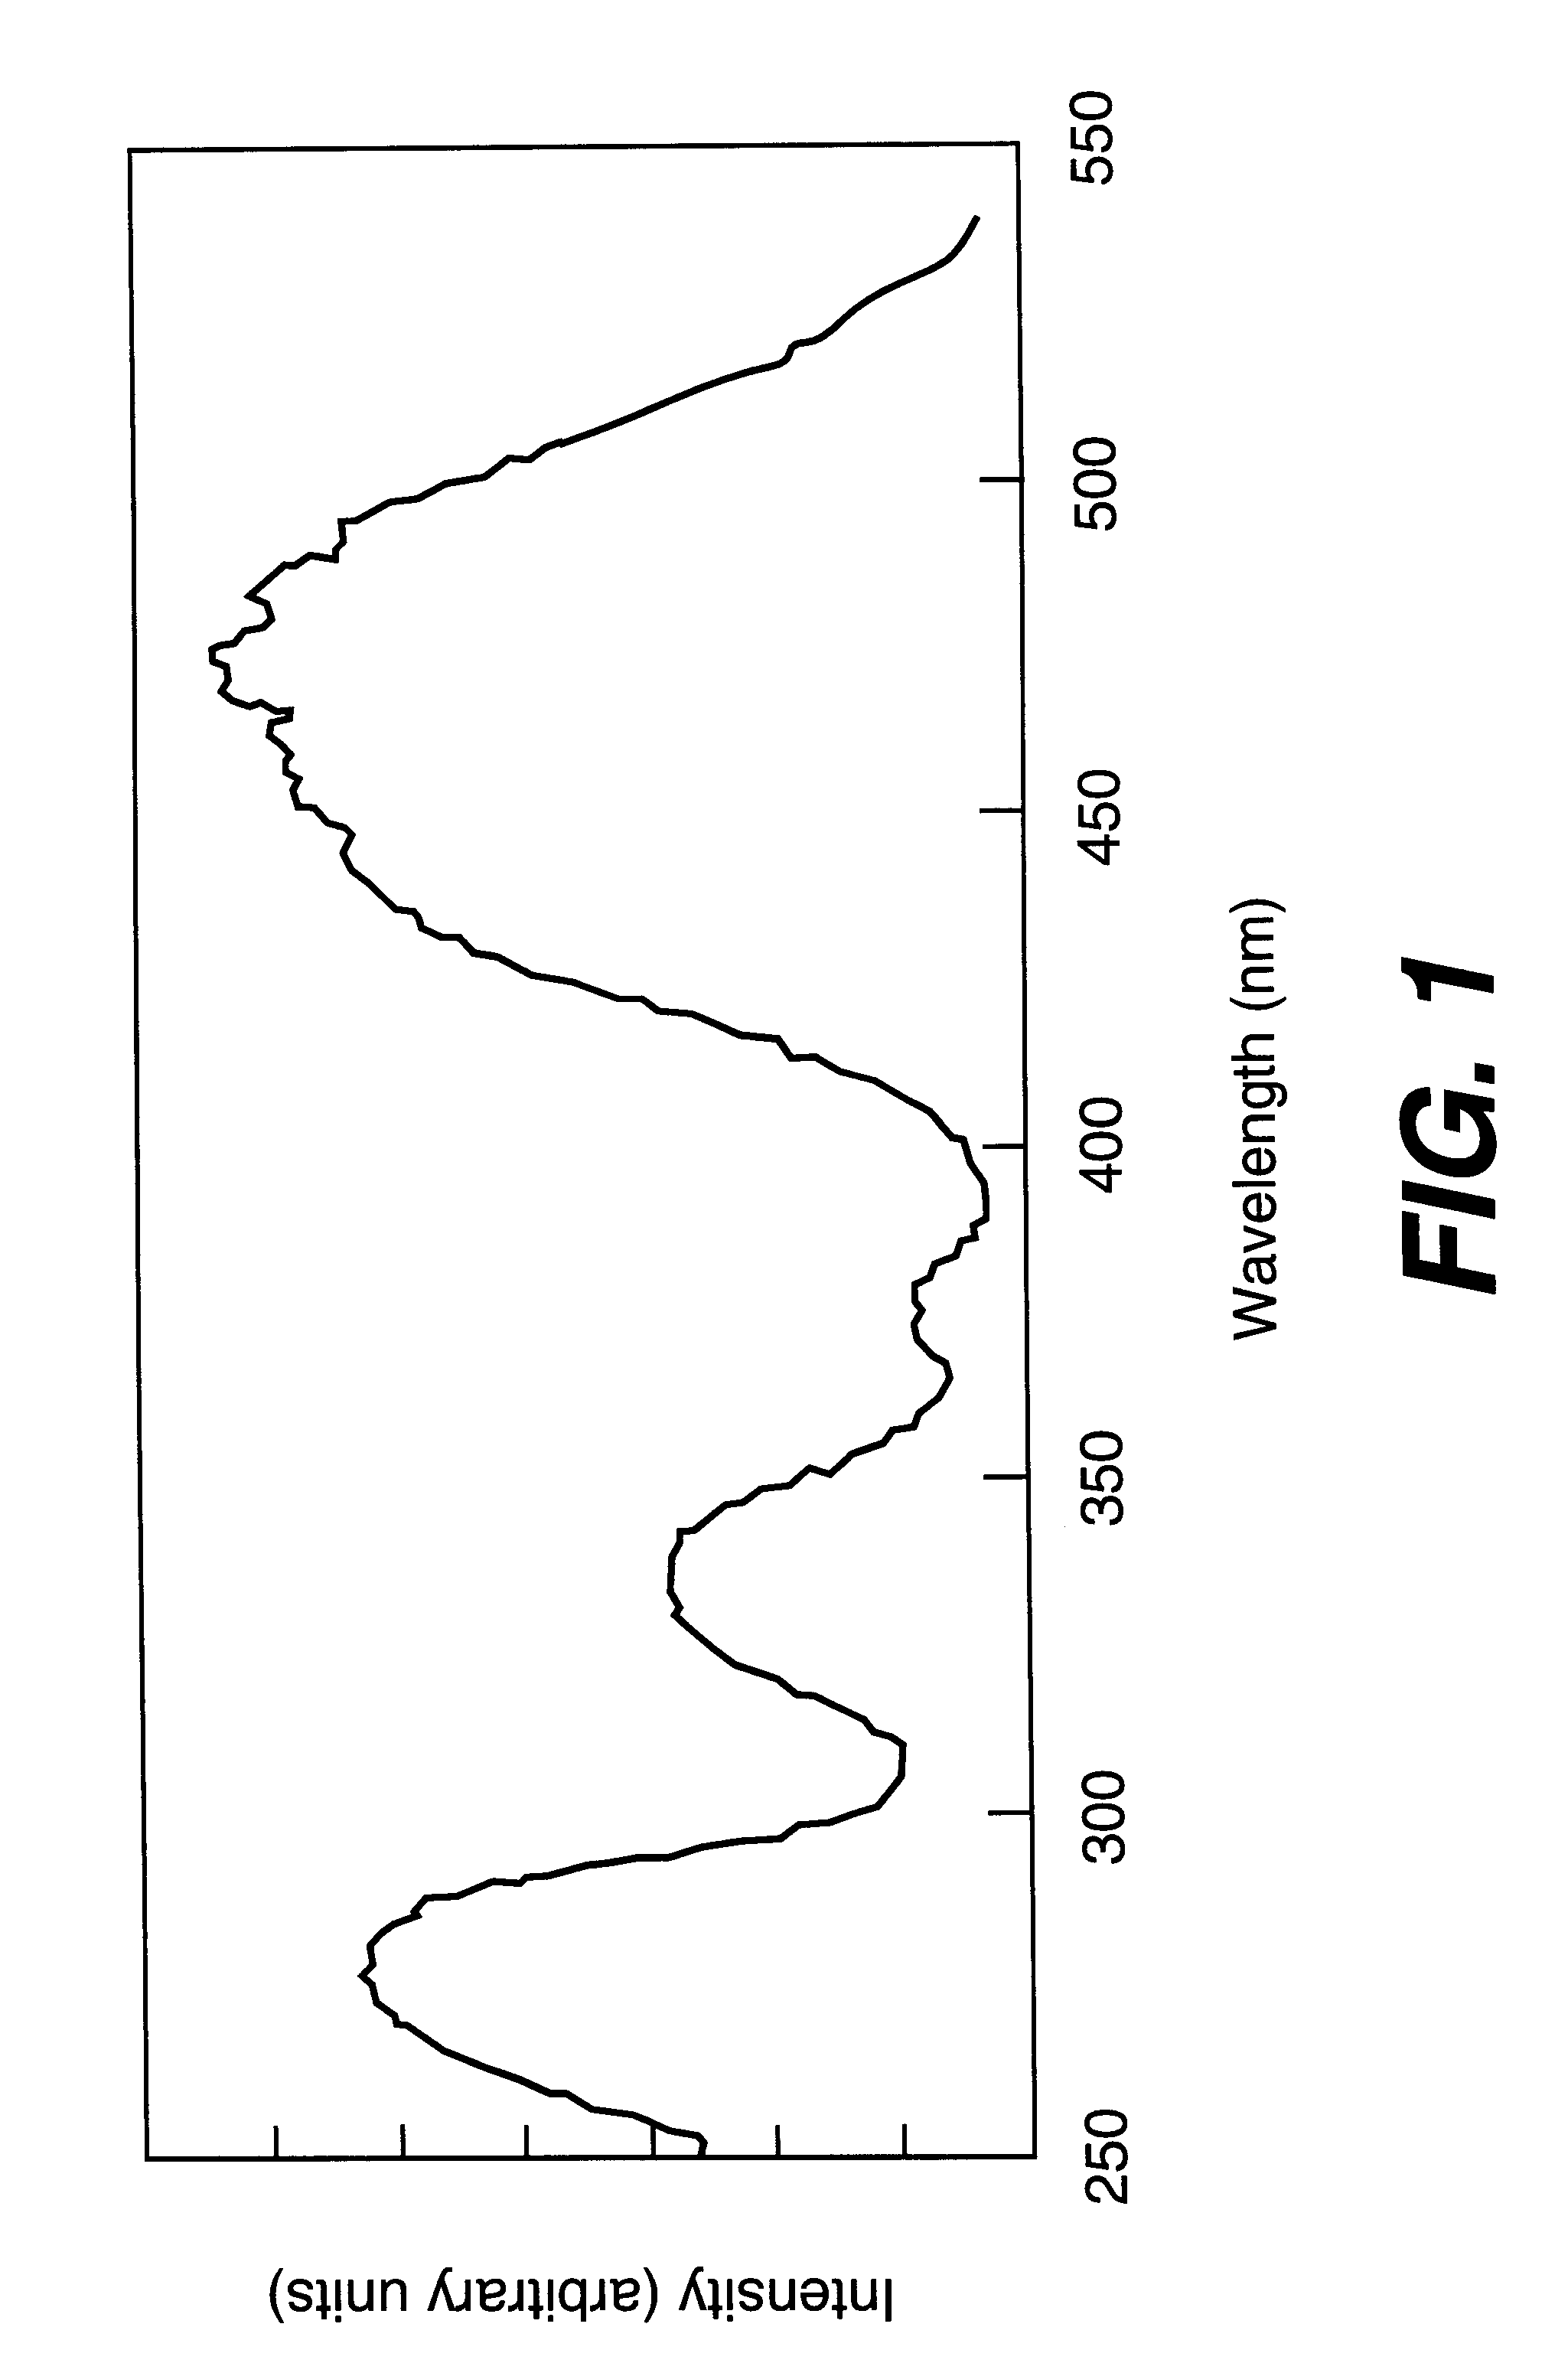 Broad-spectrum terbium-containing garnet phosphors and white-light sources incorporating the same